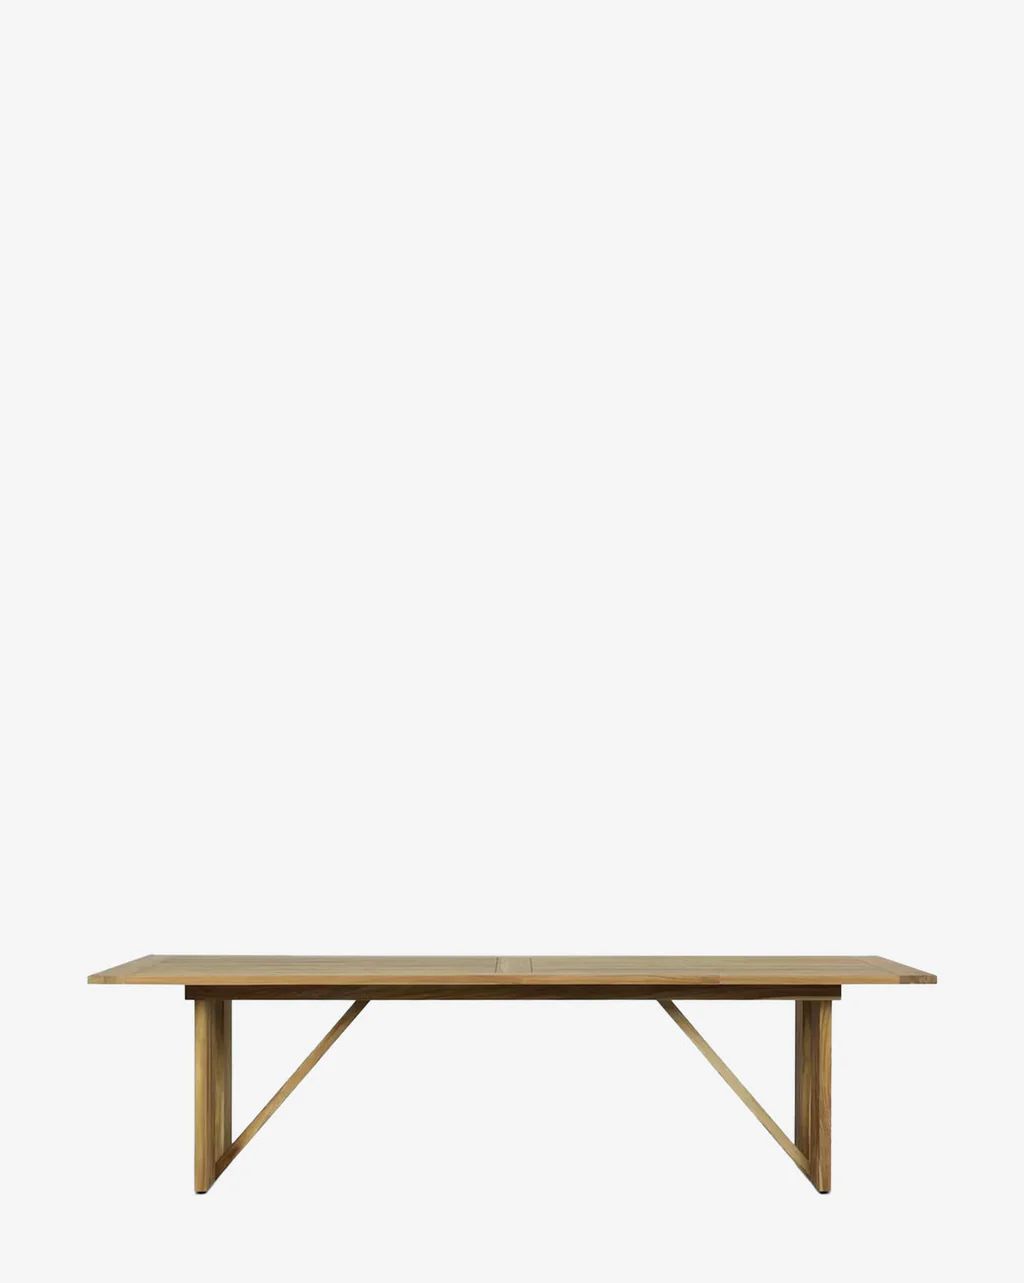 Glenmore Outdoor Dining Table | McGee & Co.